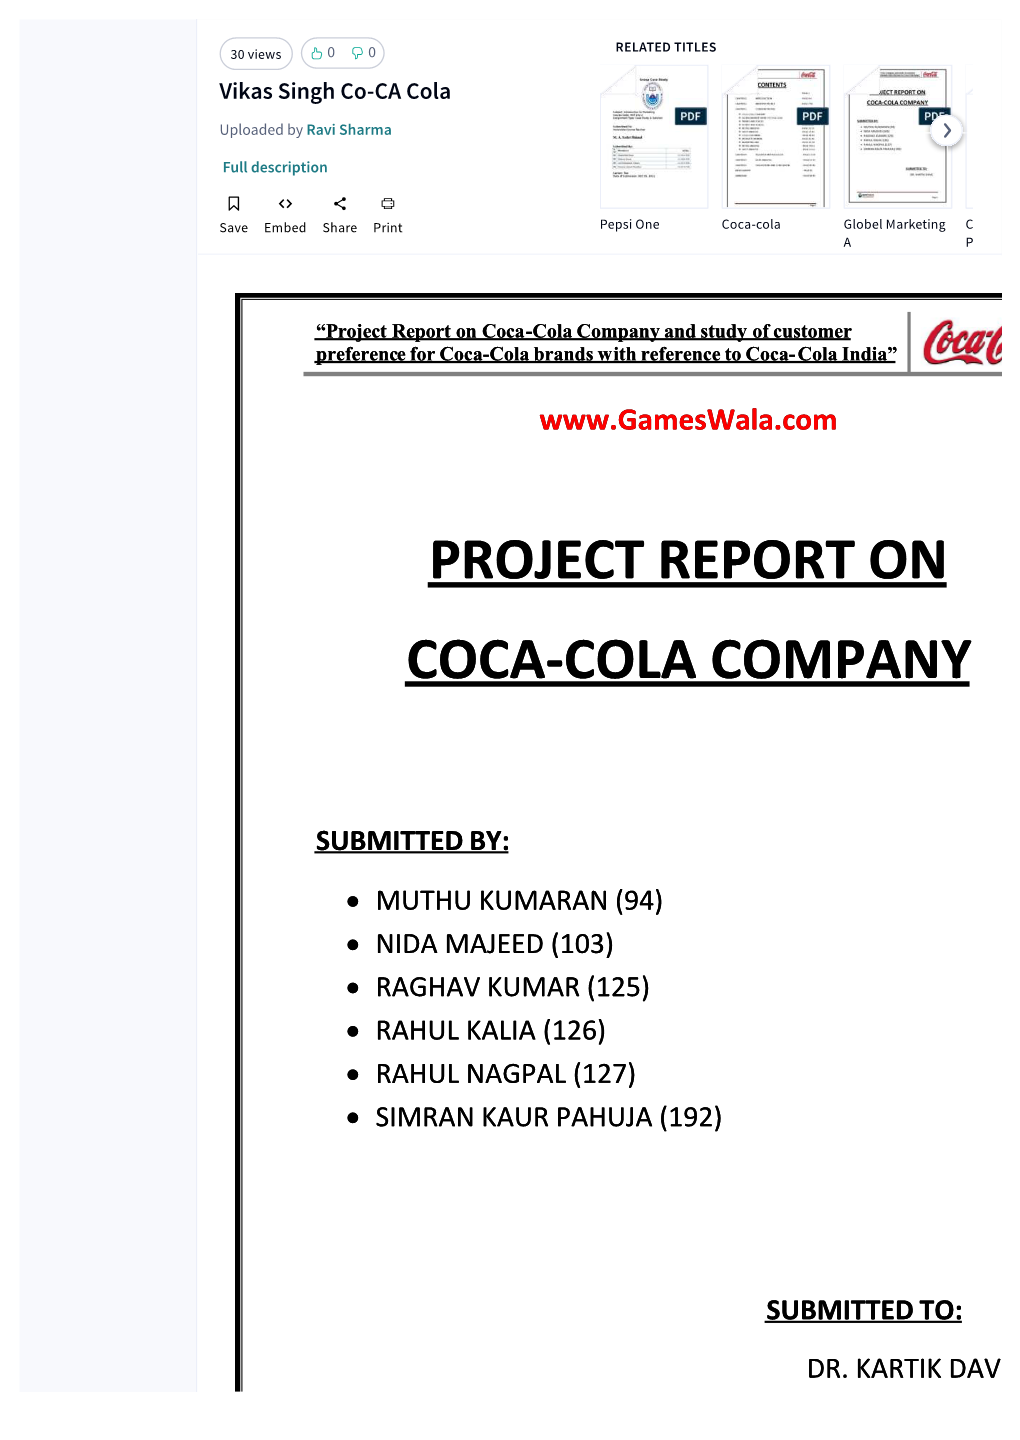 Project Report on Coca-Cola Company and Study of Customer Preference for Coca-Cola Brands with Reference to Coca-Cola India”